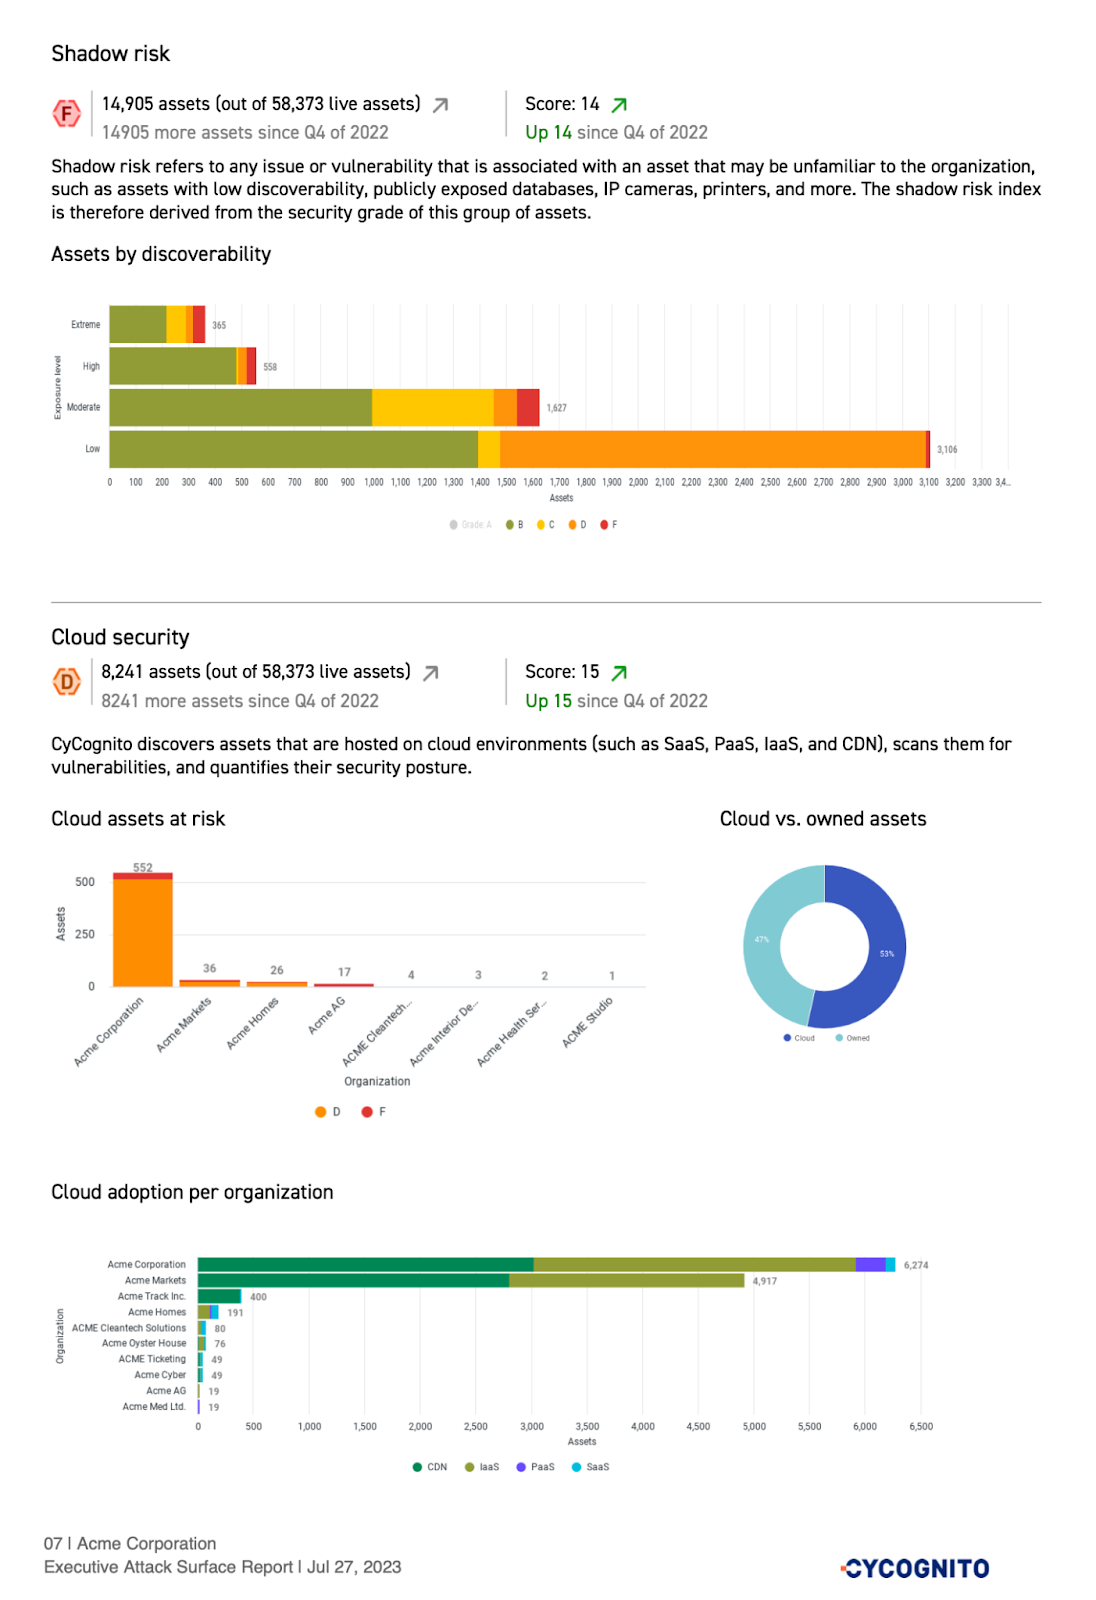 A sample report generated by the CyCognito platform, demonstrating metrics related to shadow risk and cloud assets